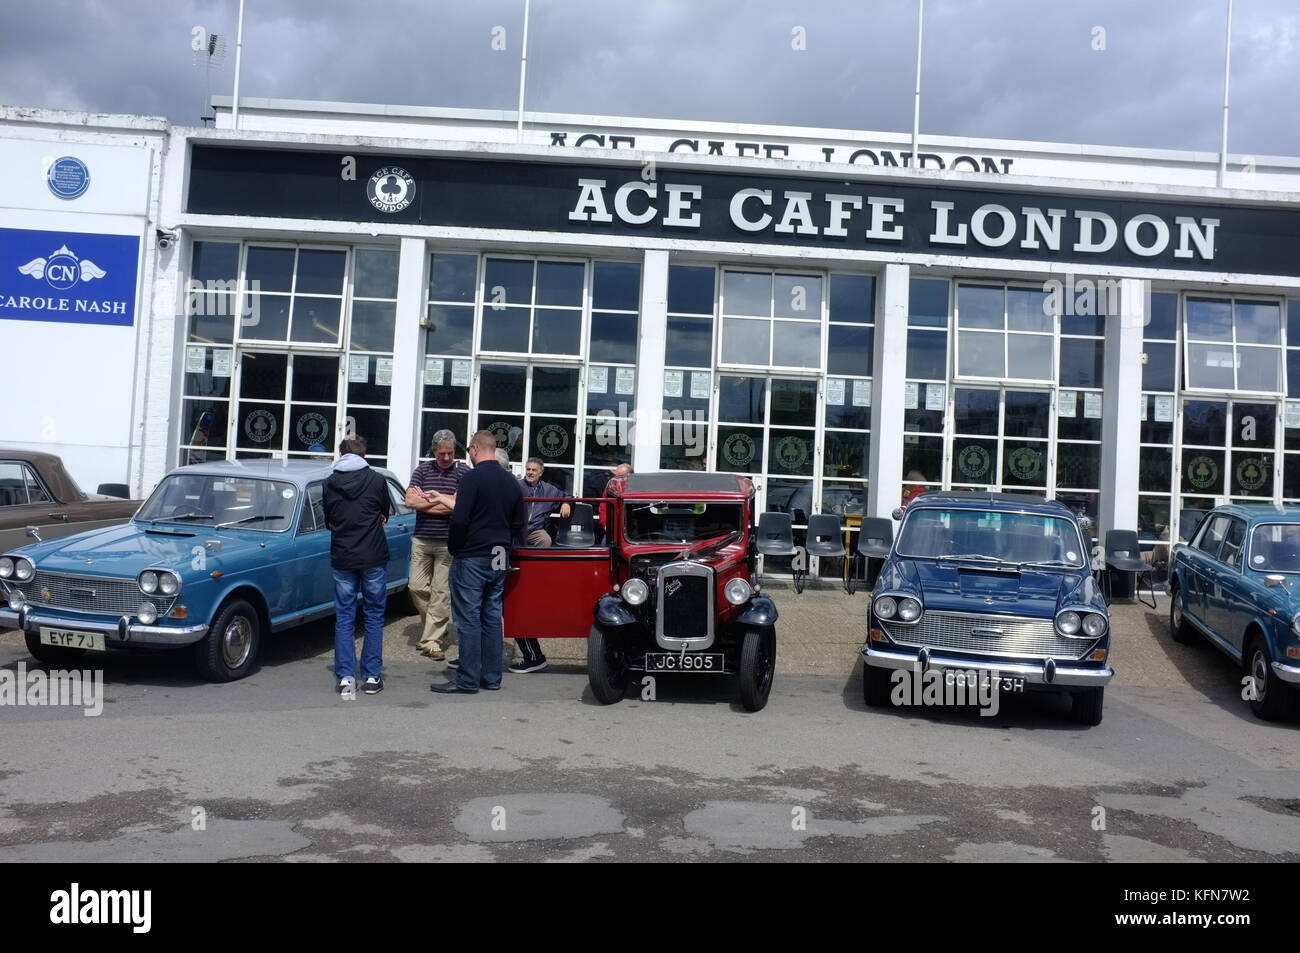 Classic Austin cars parked outside the Ace Cafe in London Stock Photo